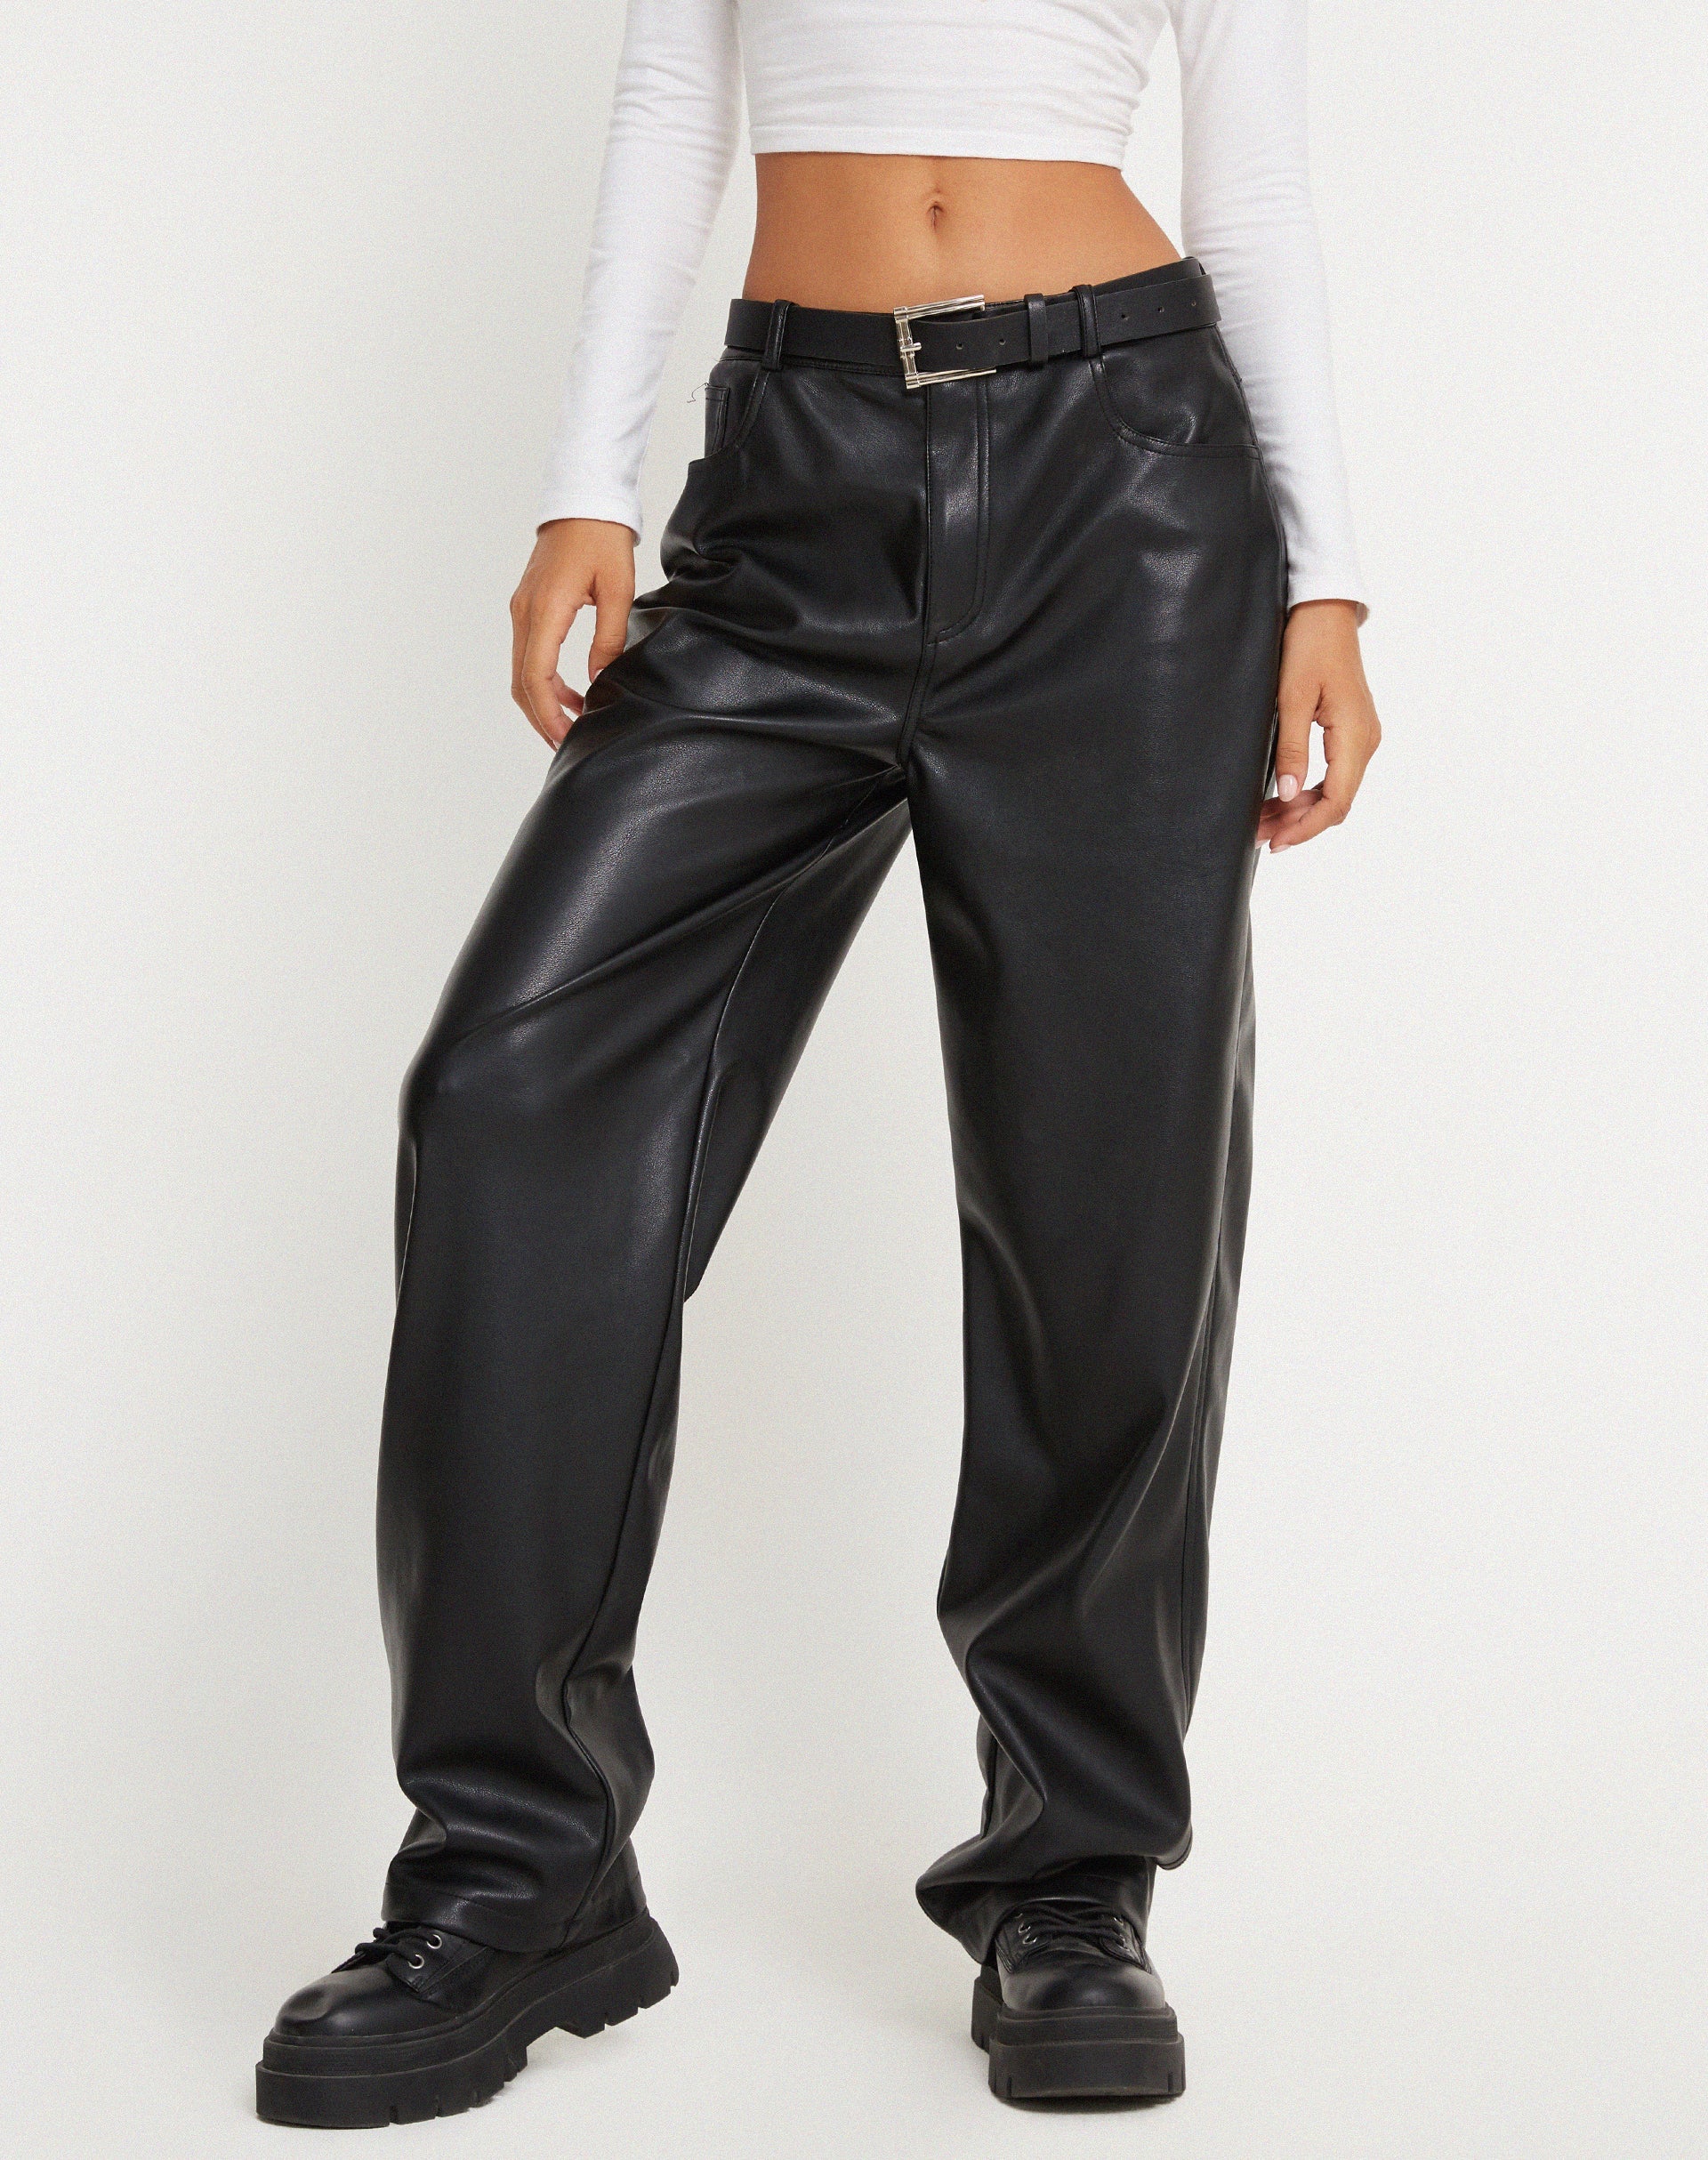 Image of MOTEL X OLIVIA NEILL Parallel Trouser in Pu Black